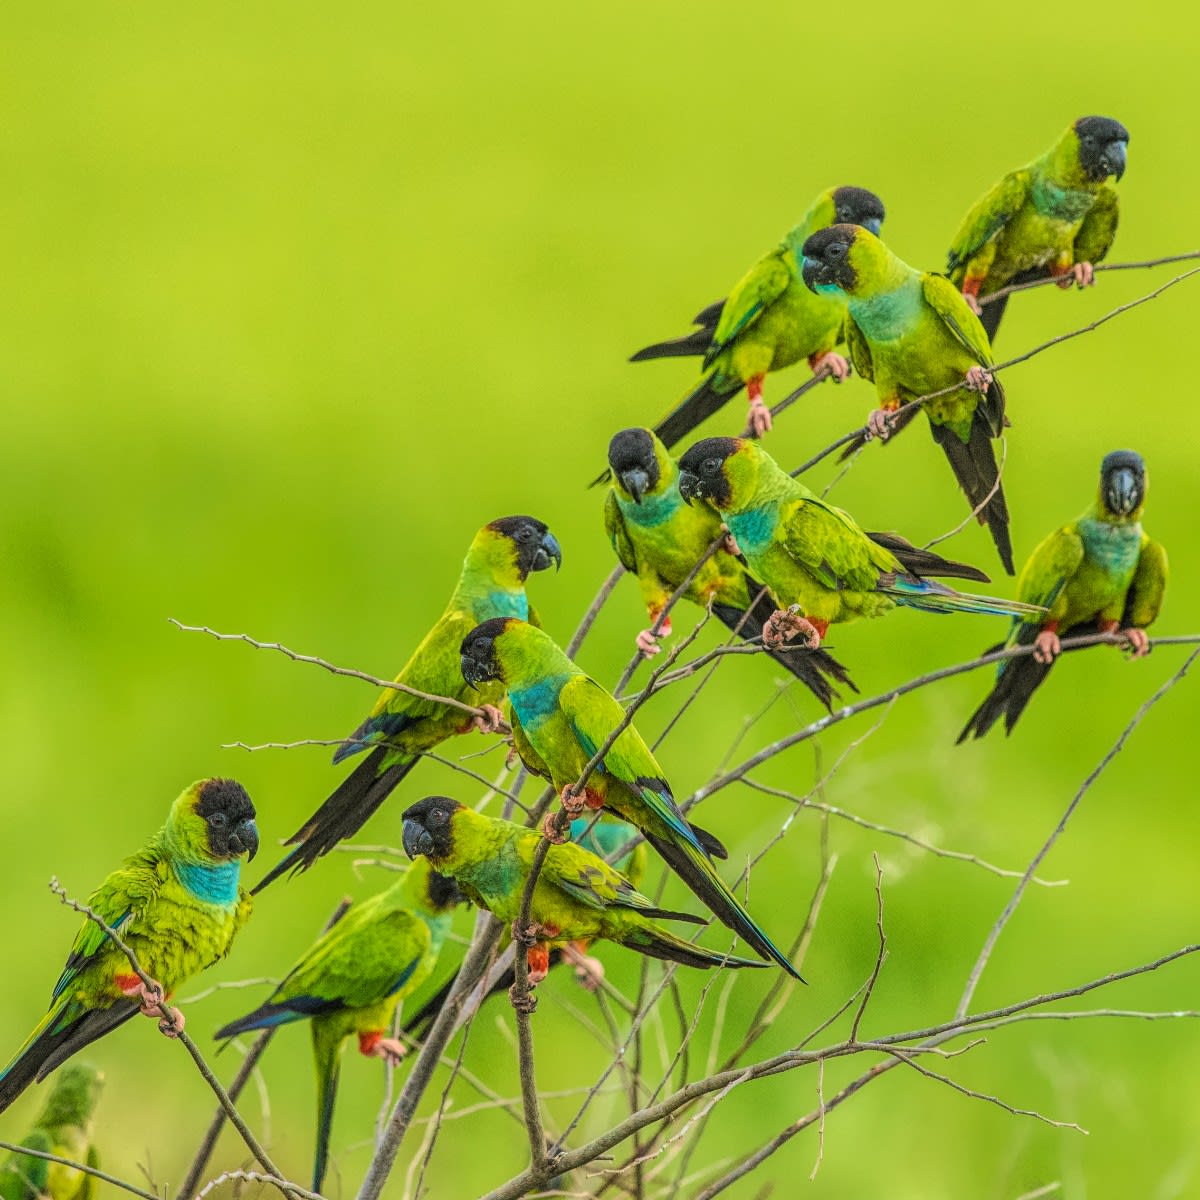 *Patiently* waiting for the concert to start Nanday parakeets (Aratinga nenday) are found in the lowlands of South America. They are very social animals forming large flocks when roosting and feeding. EarthCapture by Jarbas Mattos Expedições via Instagram